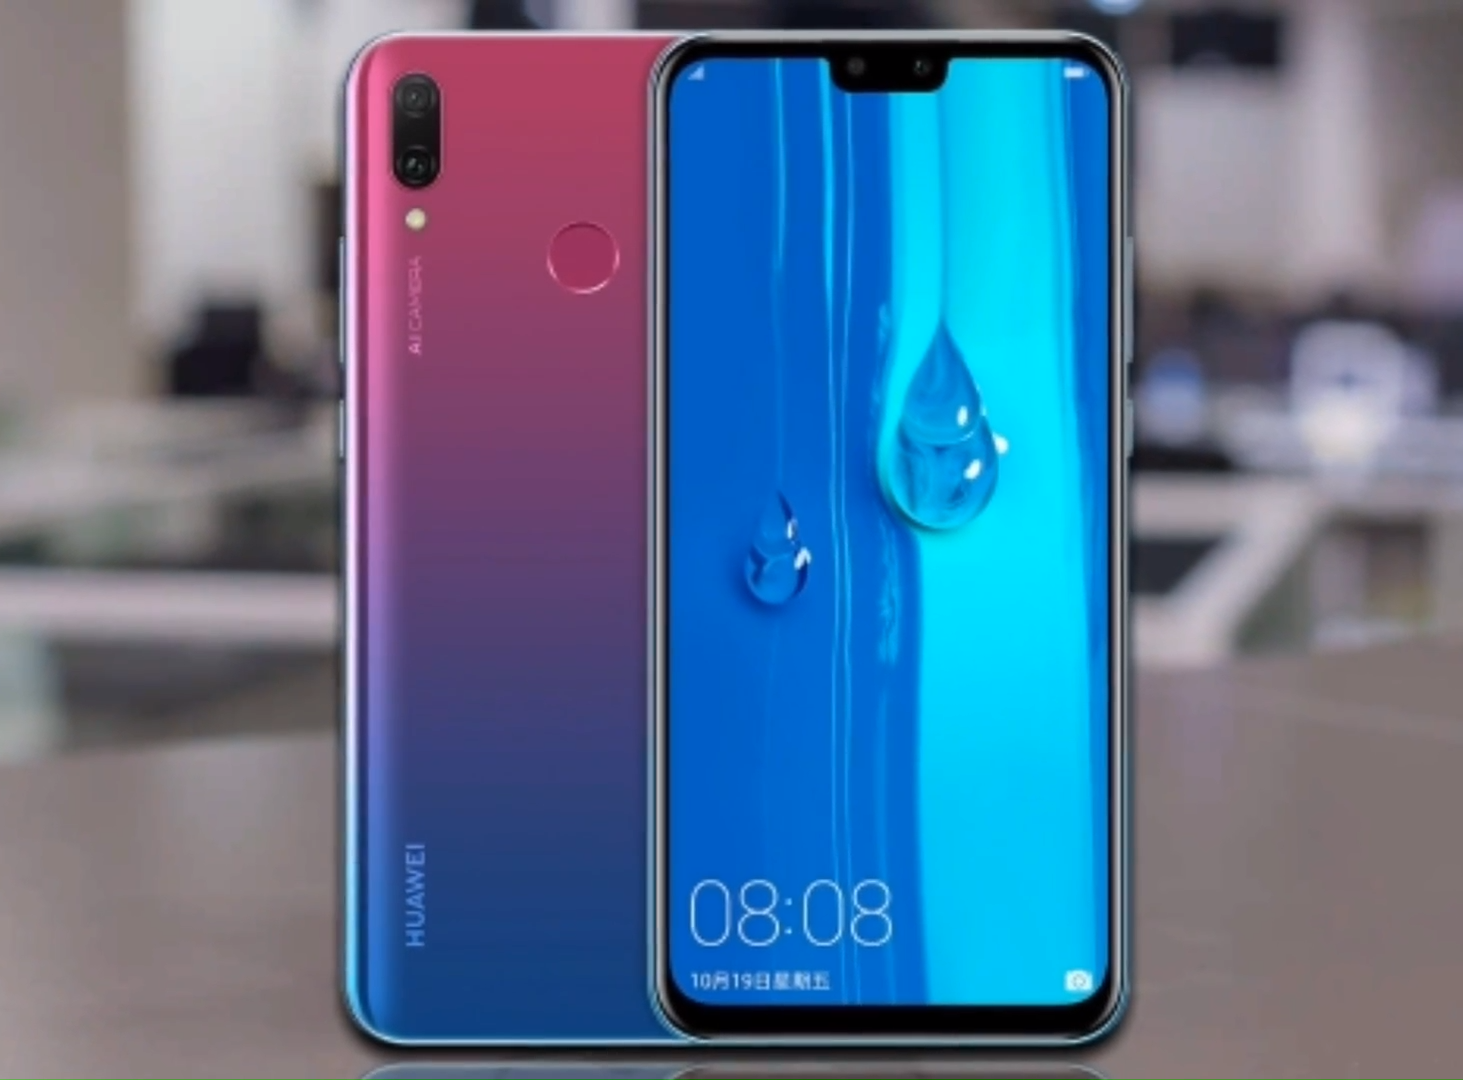 Huawei Enjoy 9 Plus and Enjoy Max smartphones: advantages and disadvantages